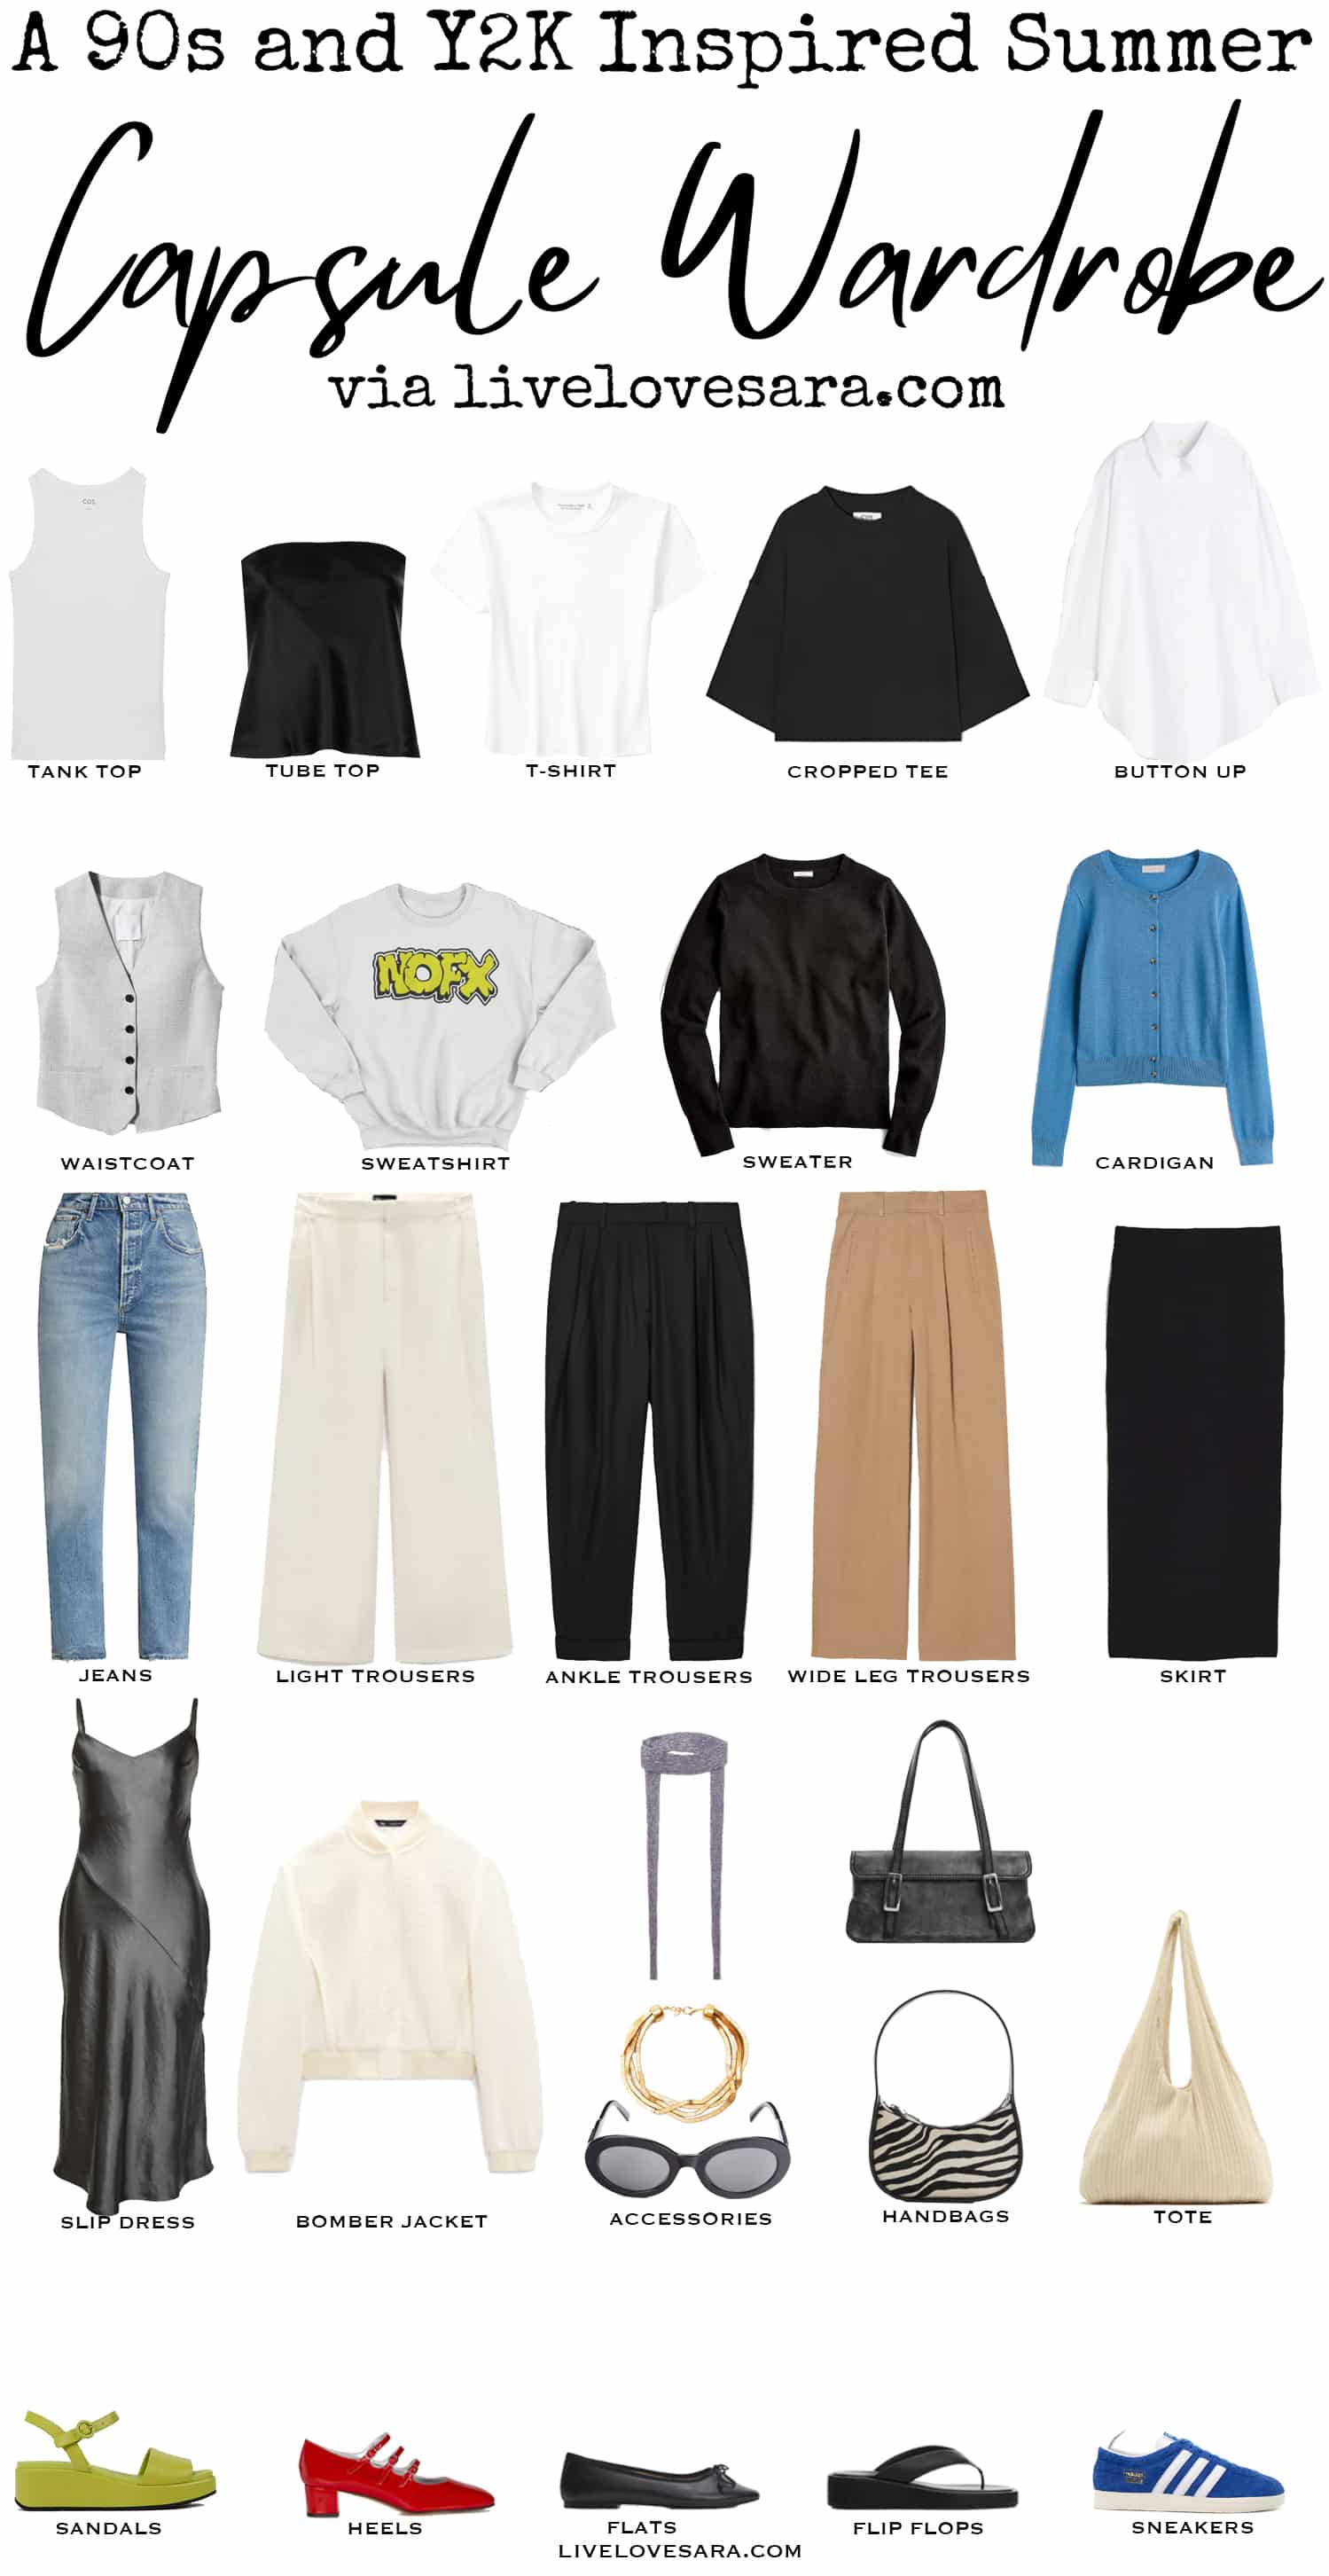 A white background with 27 items including clothes, shoes and accessories for a 90s and Y2K Inspired Summer capsule wardrobe.